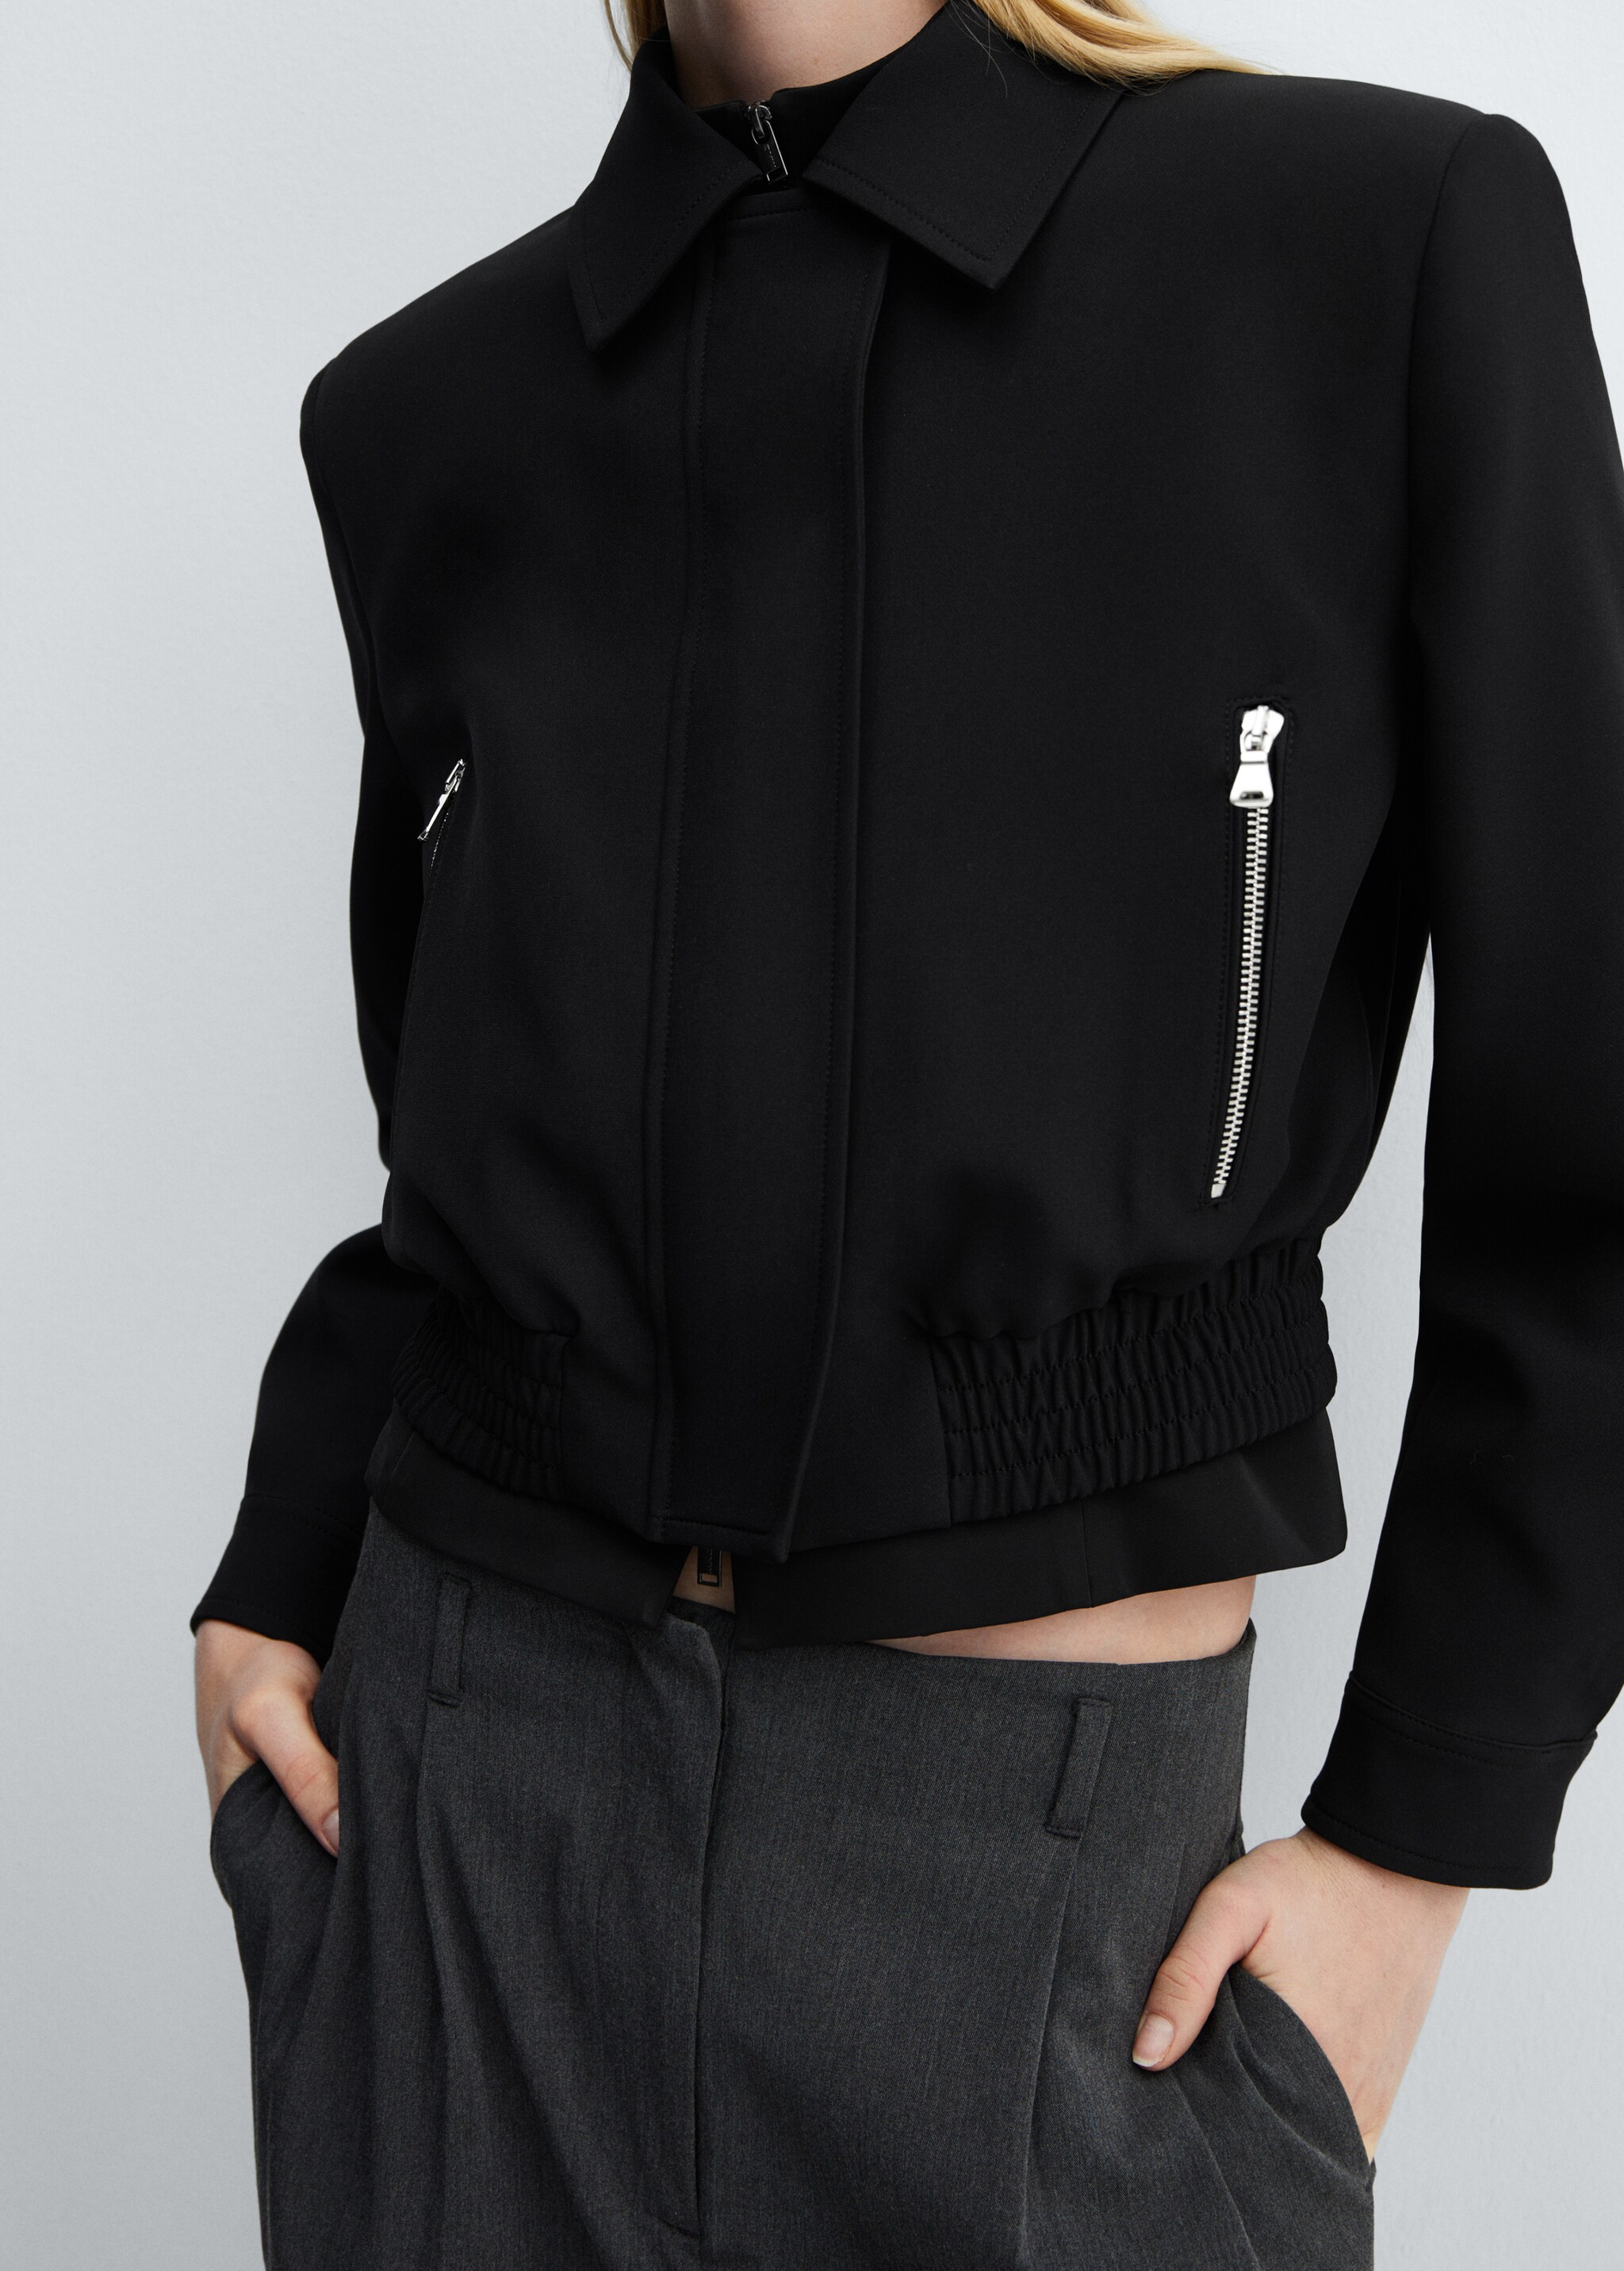 Cropped jacket with shoulder pads - Details of the article 6